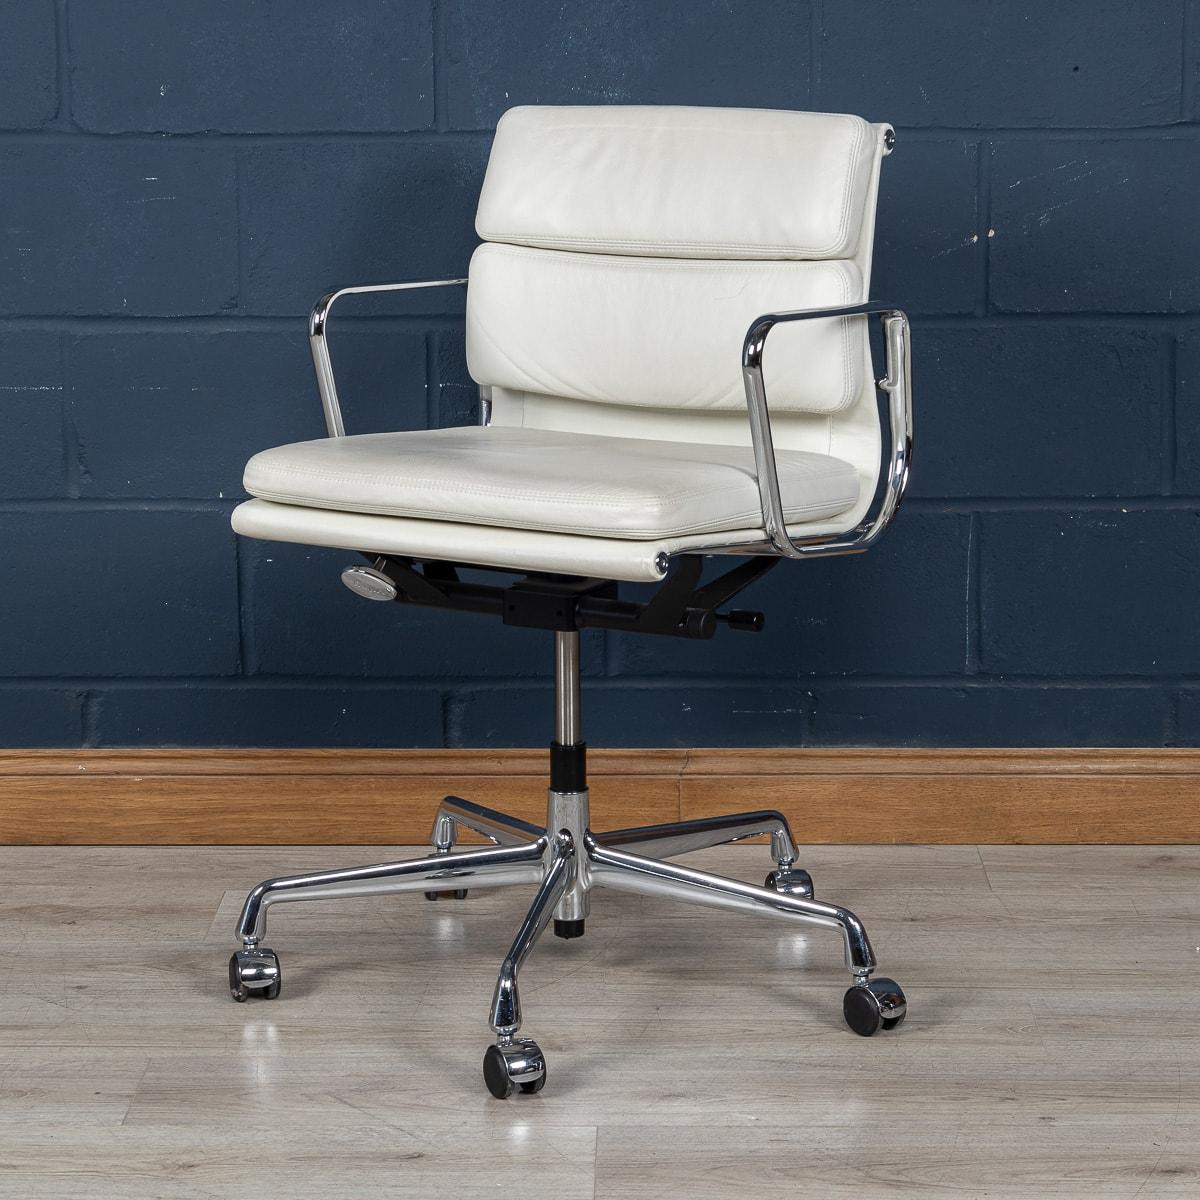 A stunning set of four Eames chairs by Vitra, of recent manufacture, in a delightful full white “snow“ leather upholstery. The white contrasts magnificently with the polished metal finish and stands on castors. Height adjustable and reclinable, the